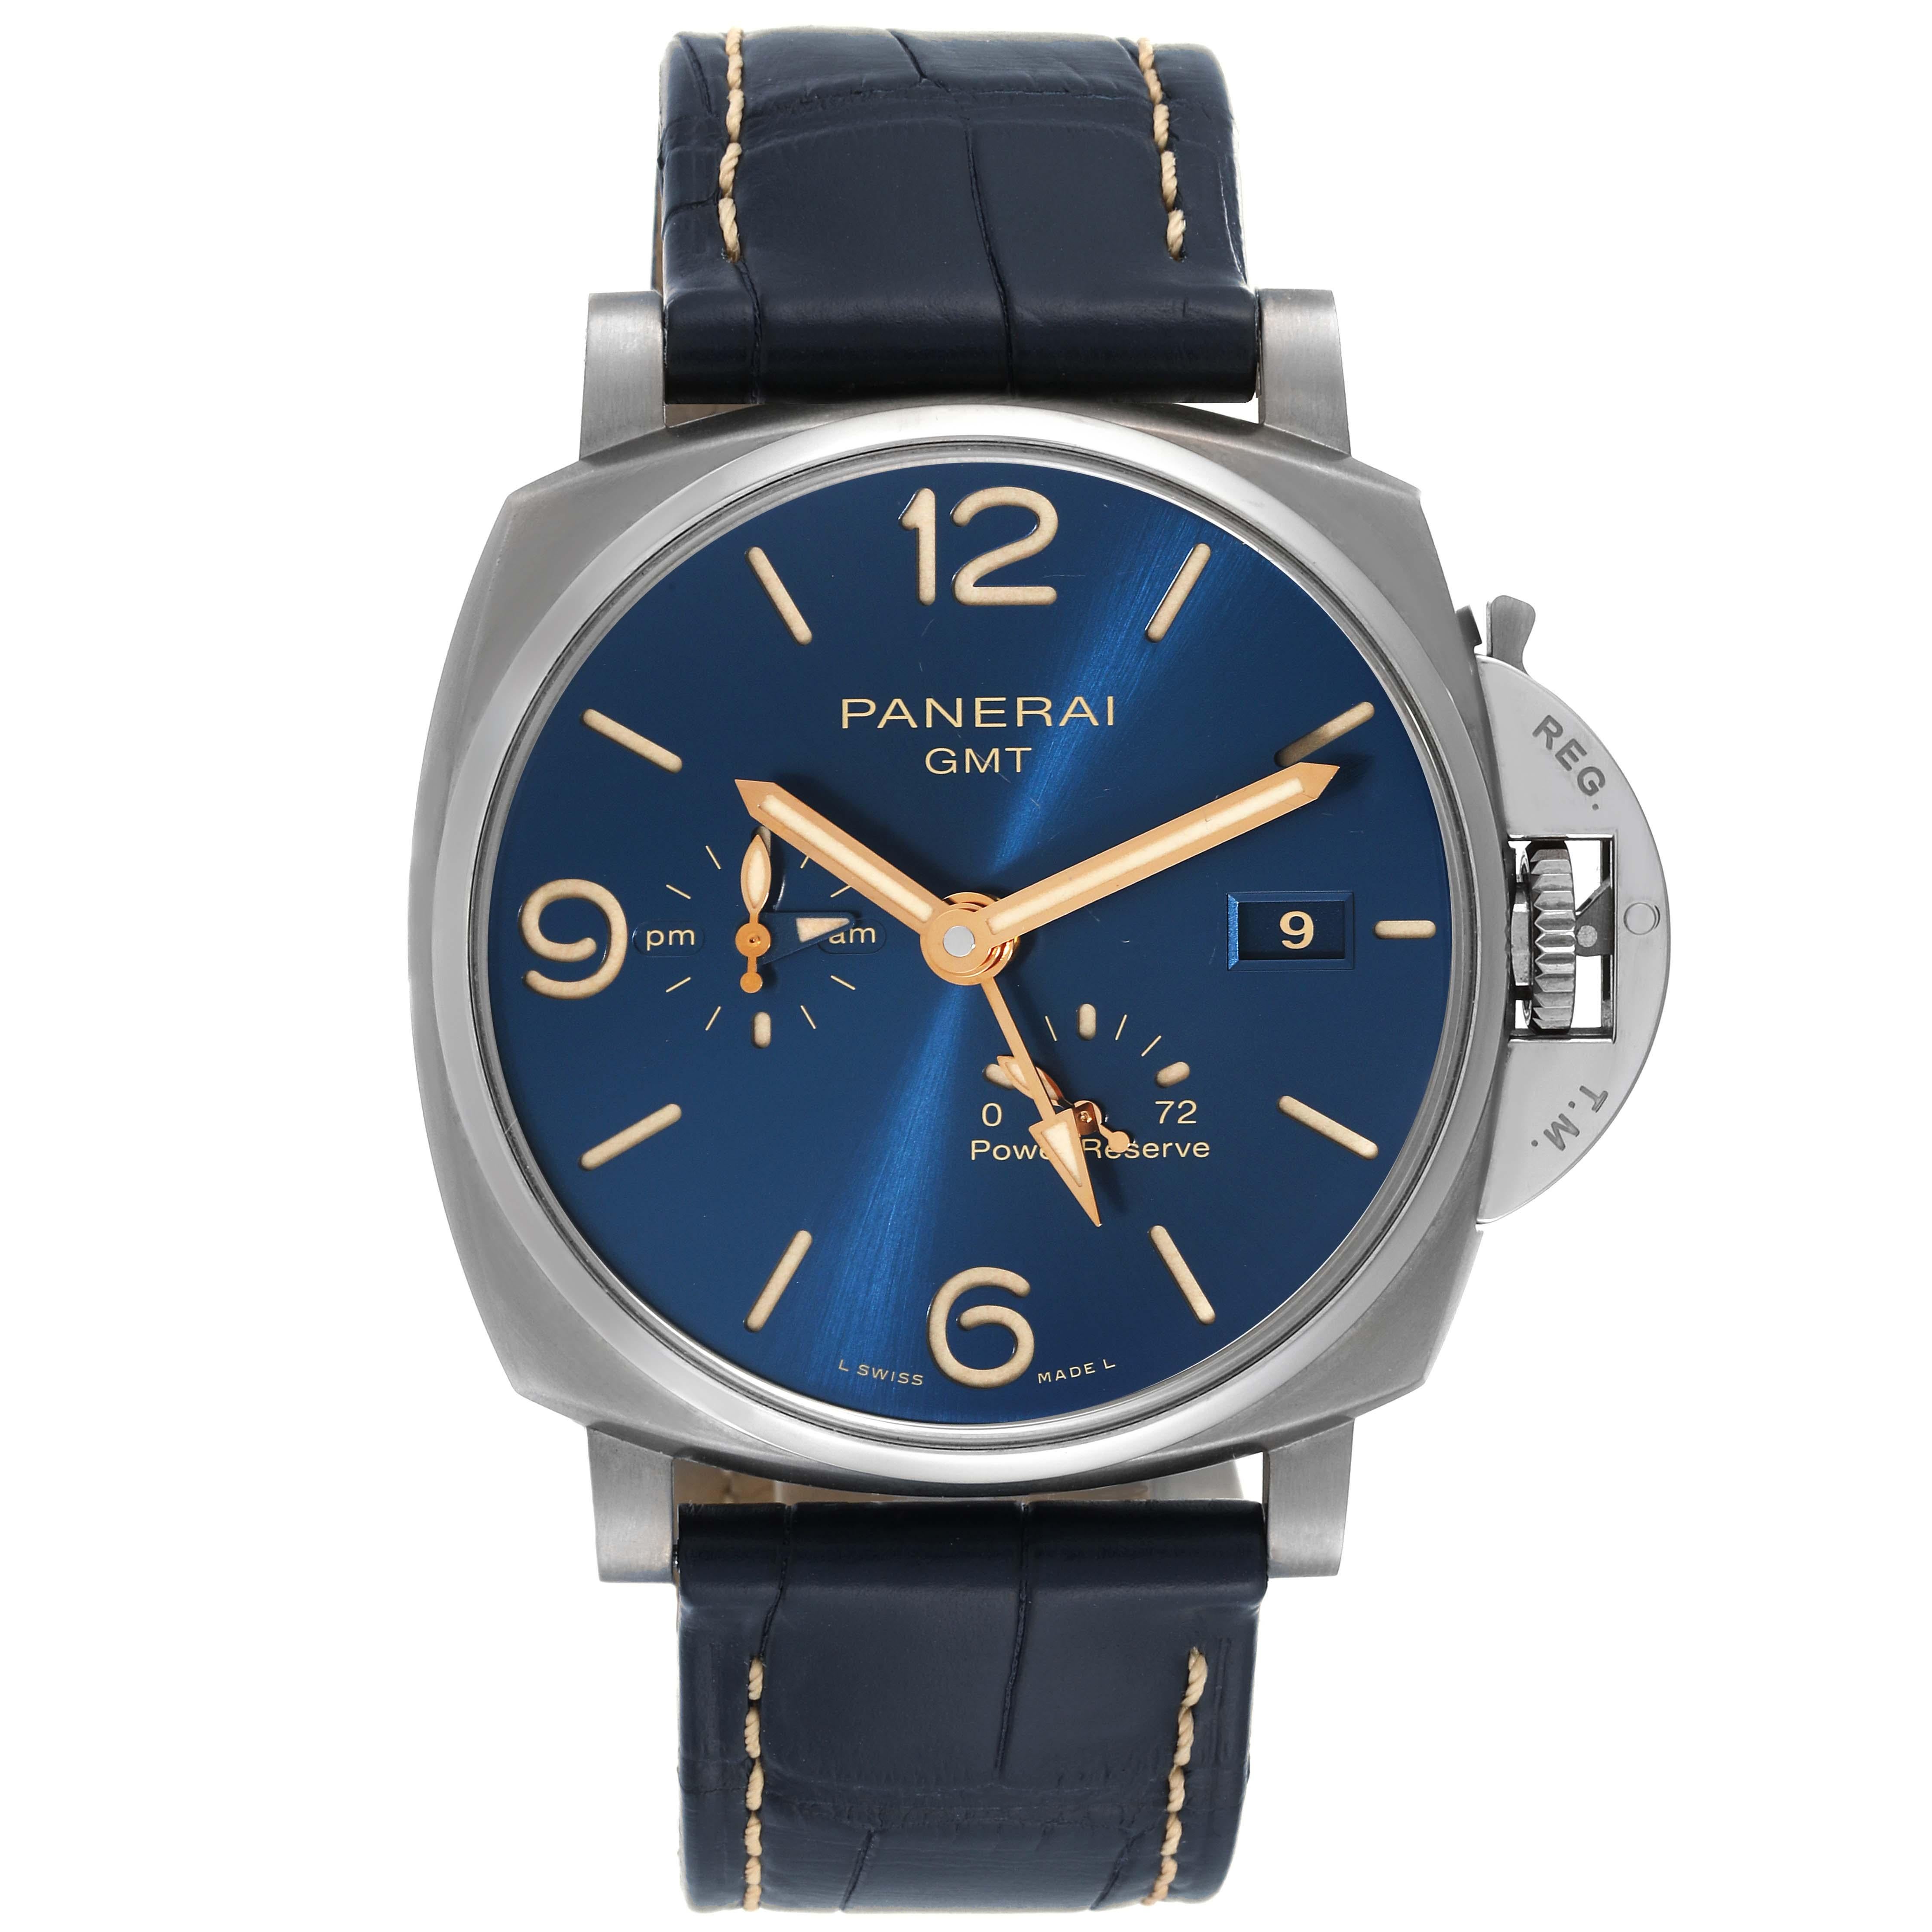 Panerai Luminor Due GMT Automatic Titanium Mens Watch PAM00964 Box Card. Automatic self-winding movement. Titanium cushion-shaped case 45.0 mm in diameter. Polished Panerai patented crown protector. Exhibition transparent sapphire crystal caseback.